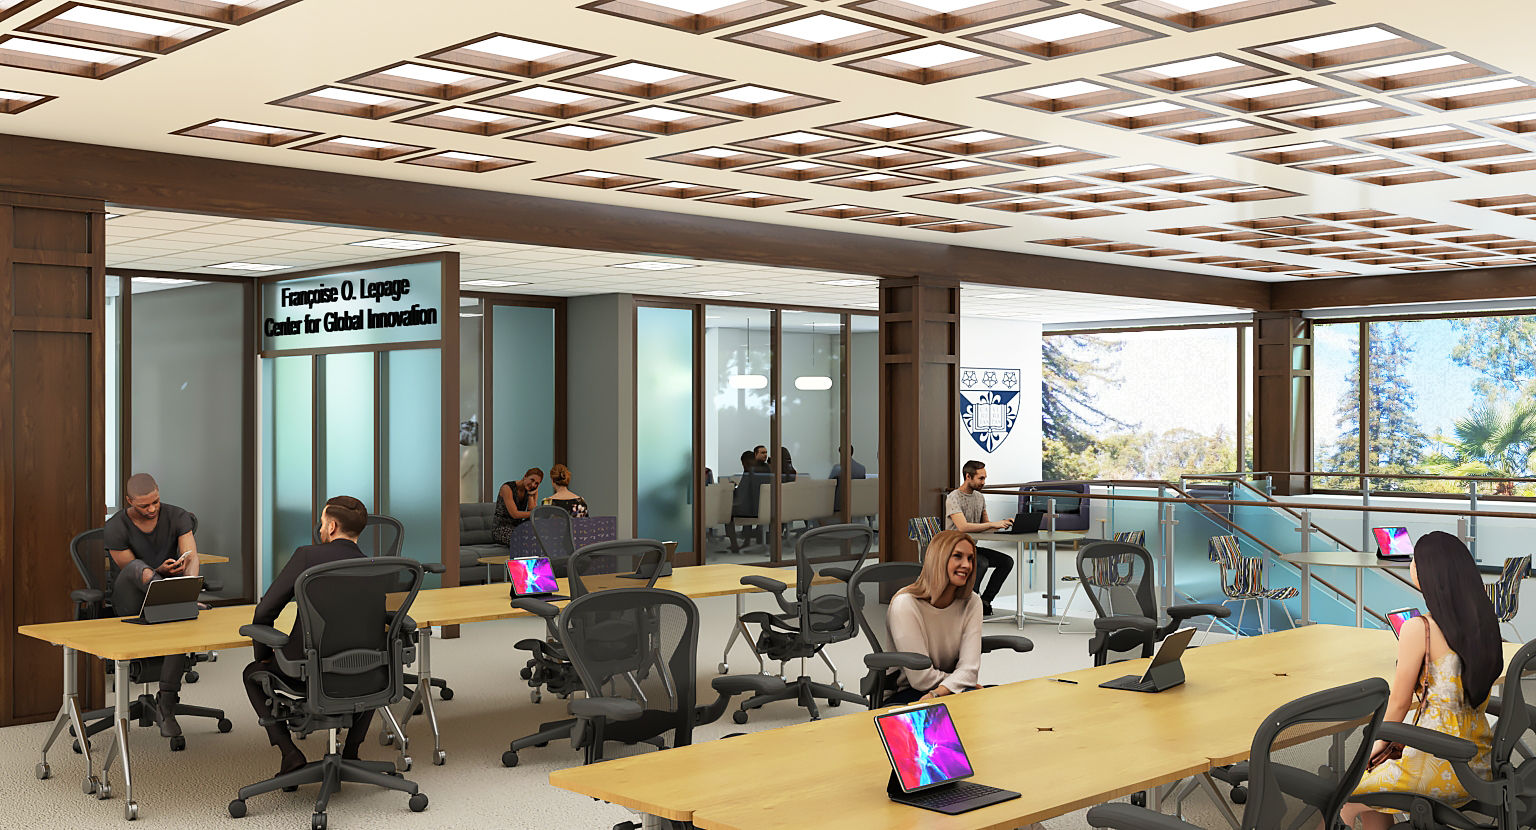 Digital rendering of studying and working space at the Center for the Dominican Experience & Archbishop Alemany Library